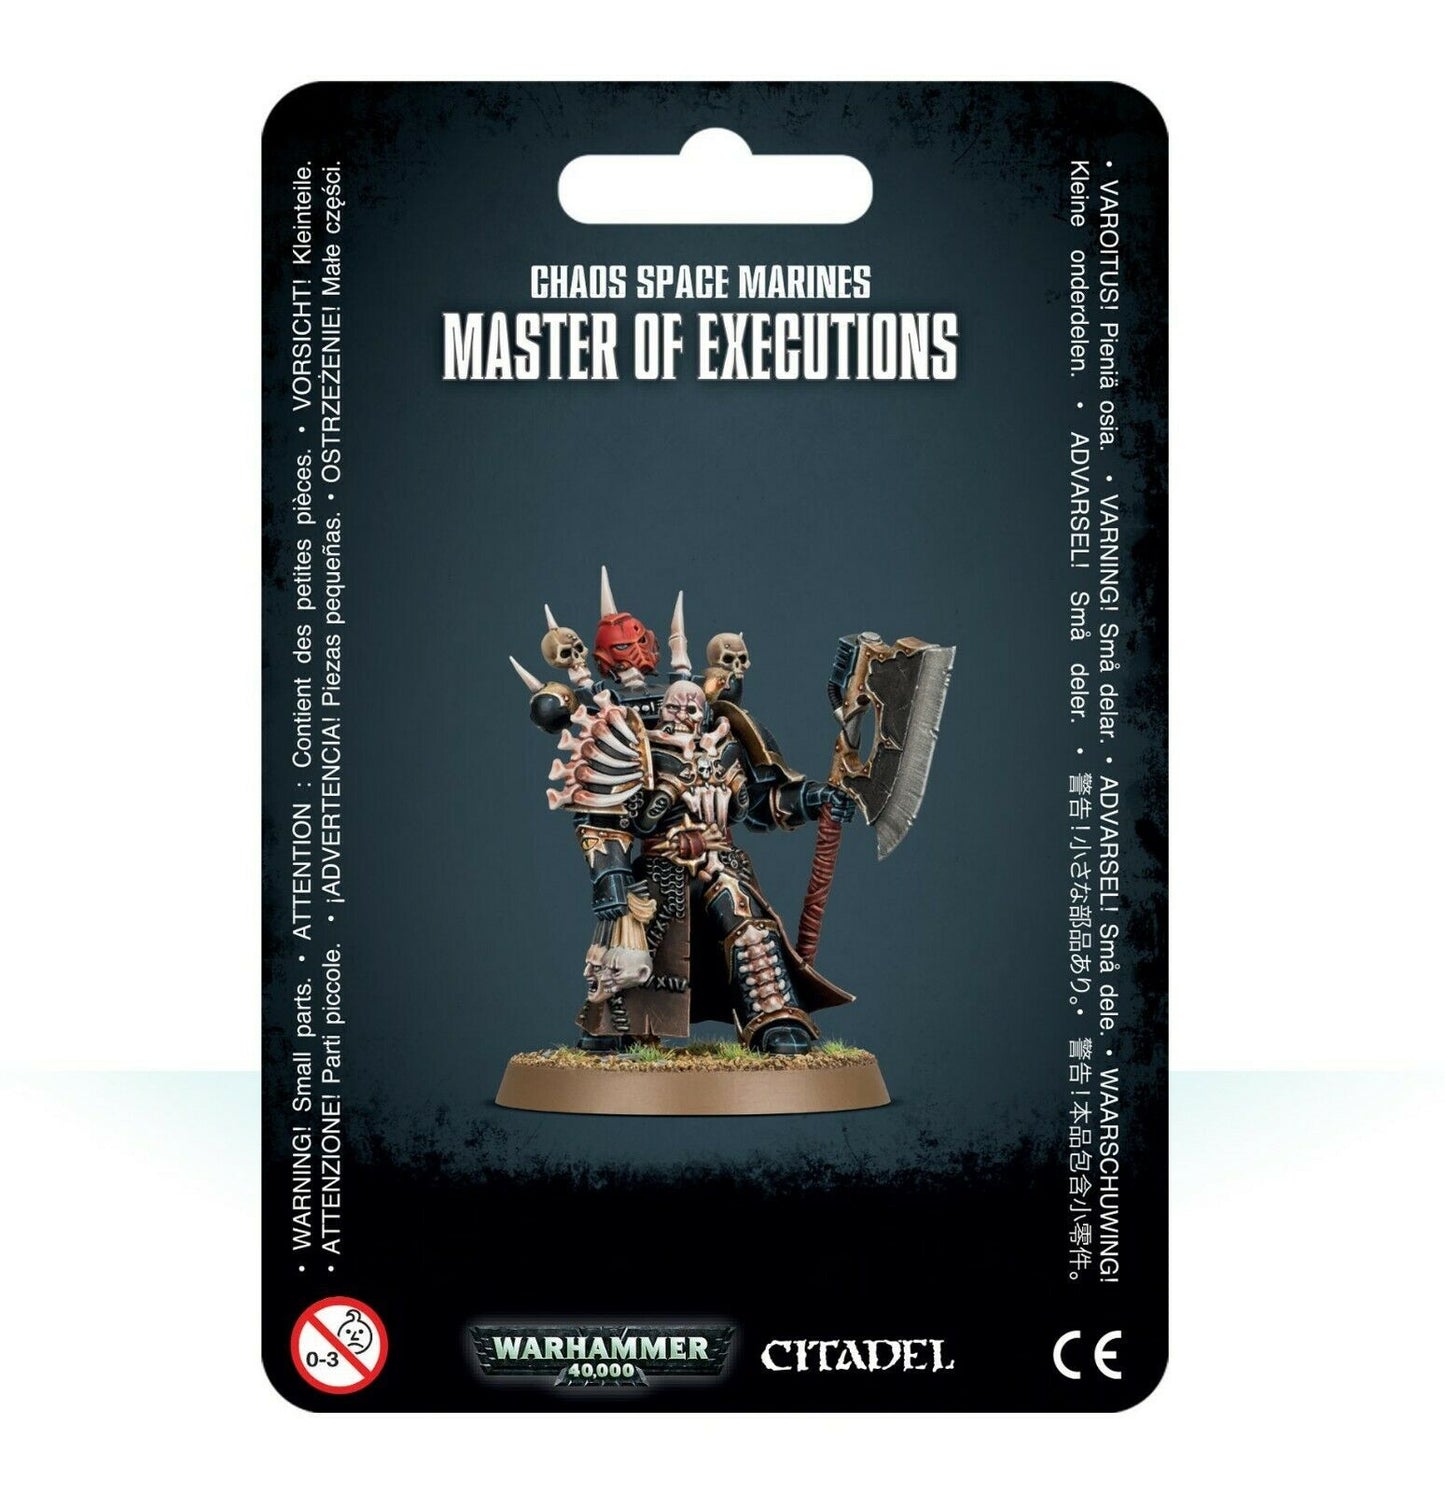 Discount Chaos Space Marines Master of Executions - West Coast Games